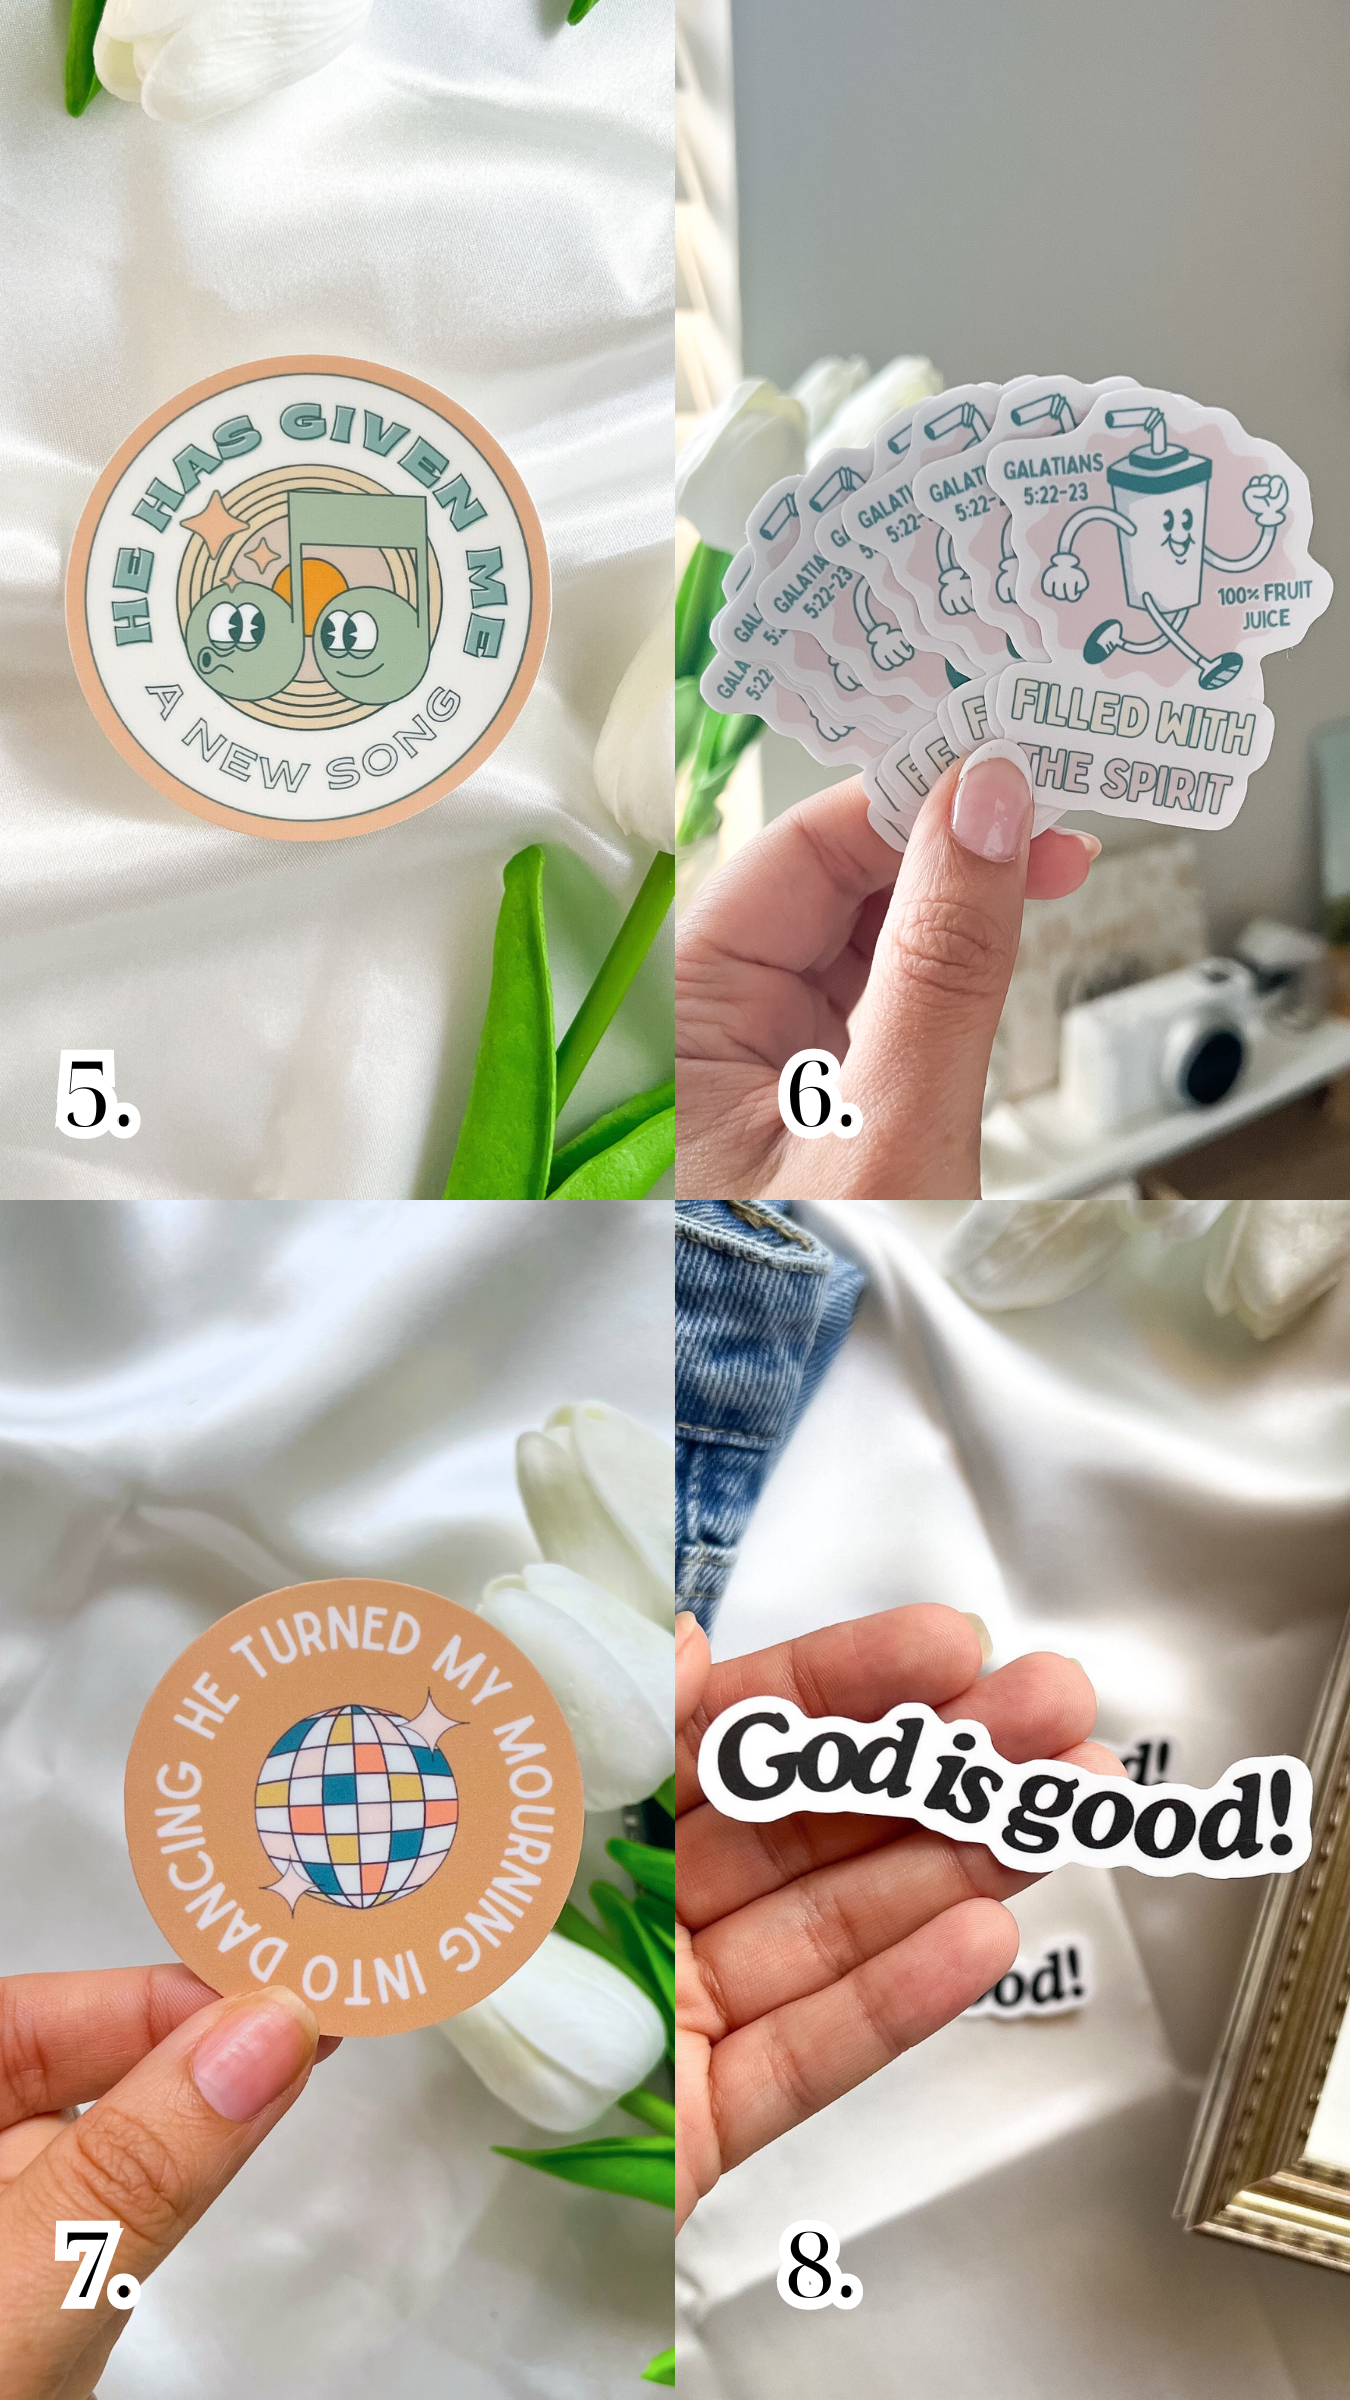 Build Your Own Christian Sticker Pack